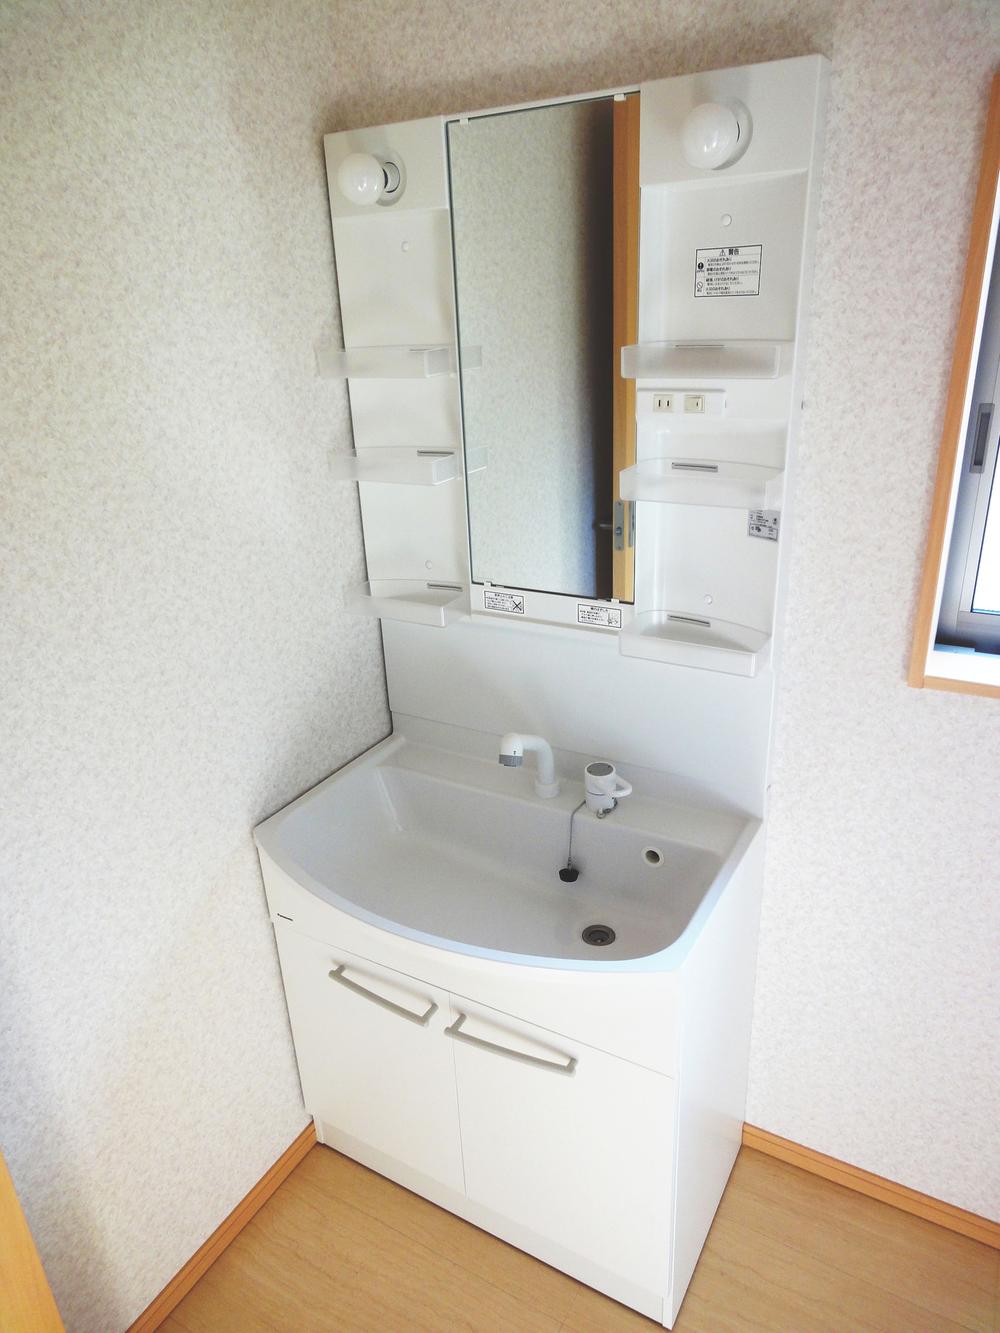 Same specifications photos (Other introspection). Shampoo dresser (company example of construction photos)